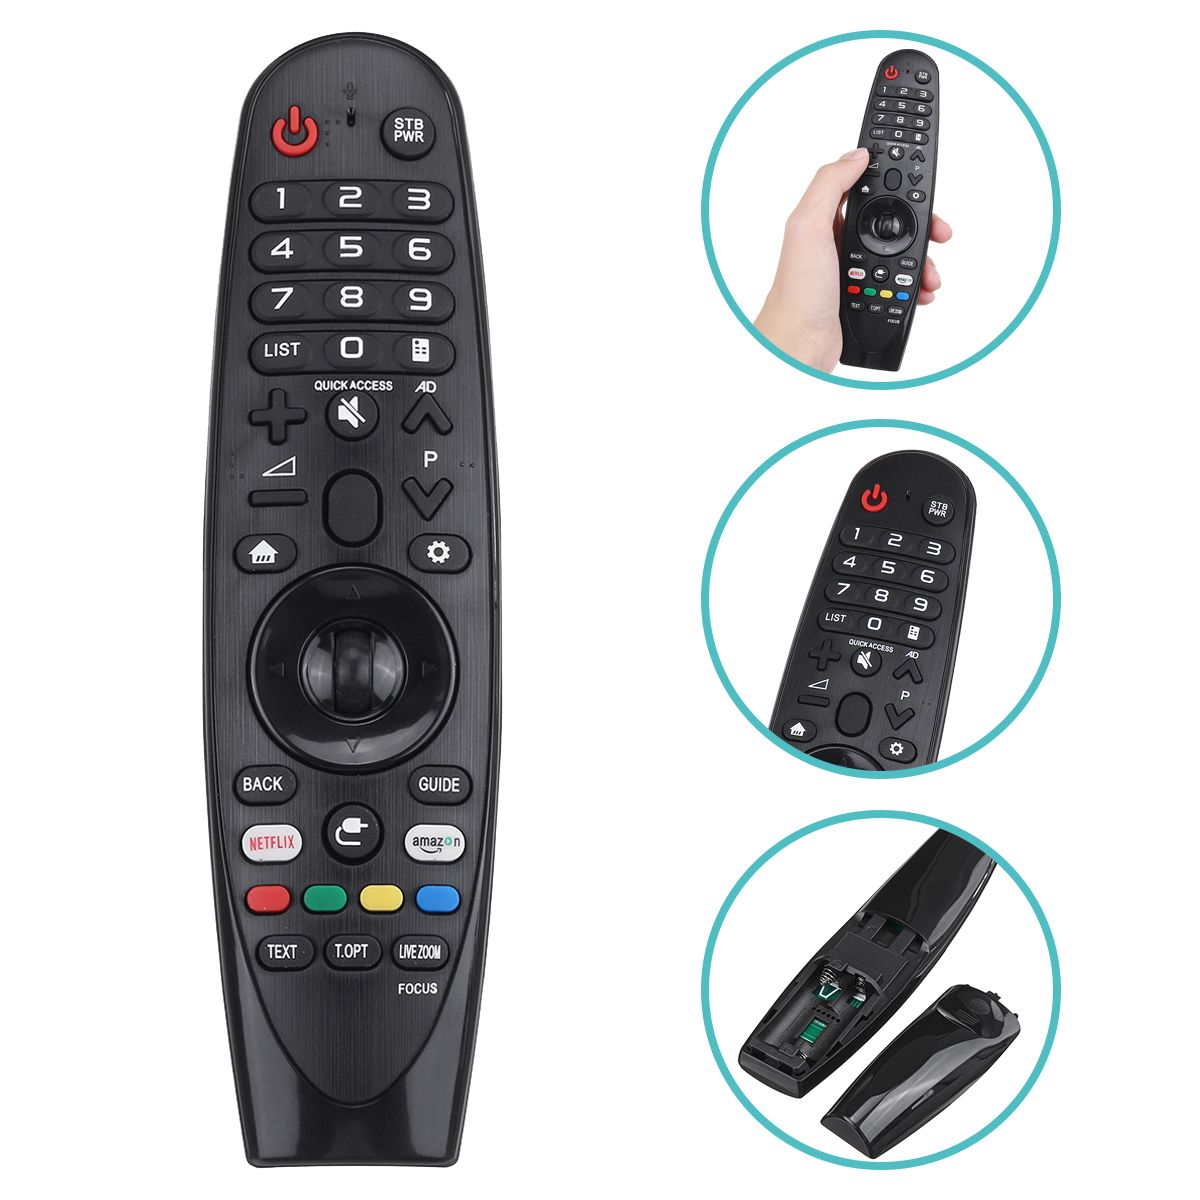 Replace-Remote-Control-Voice-Universal-For-LG-Magic-Smart-TV-AN-MR650A-1711562